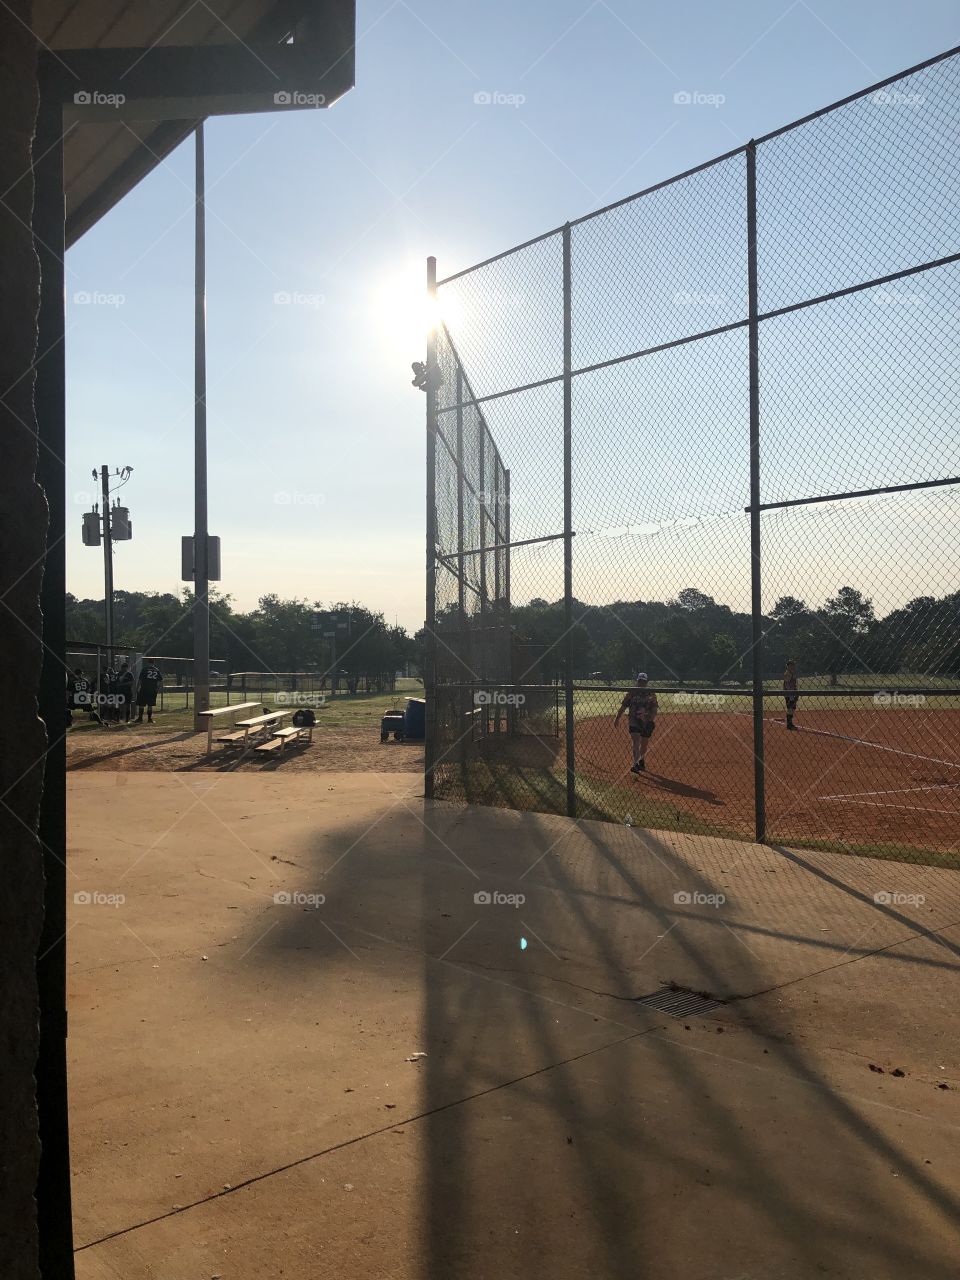 Sunny Softball Sunday. Beautiful day for league play. Smell the burgers and fries. Hear the cheers. 